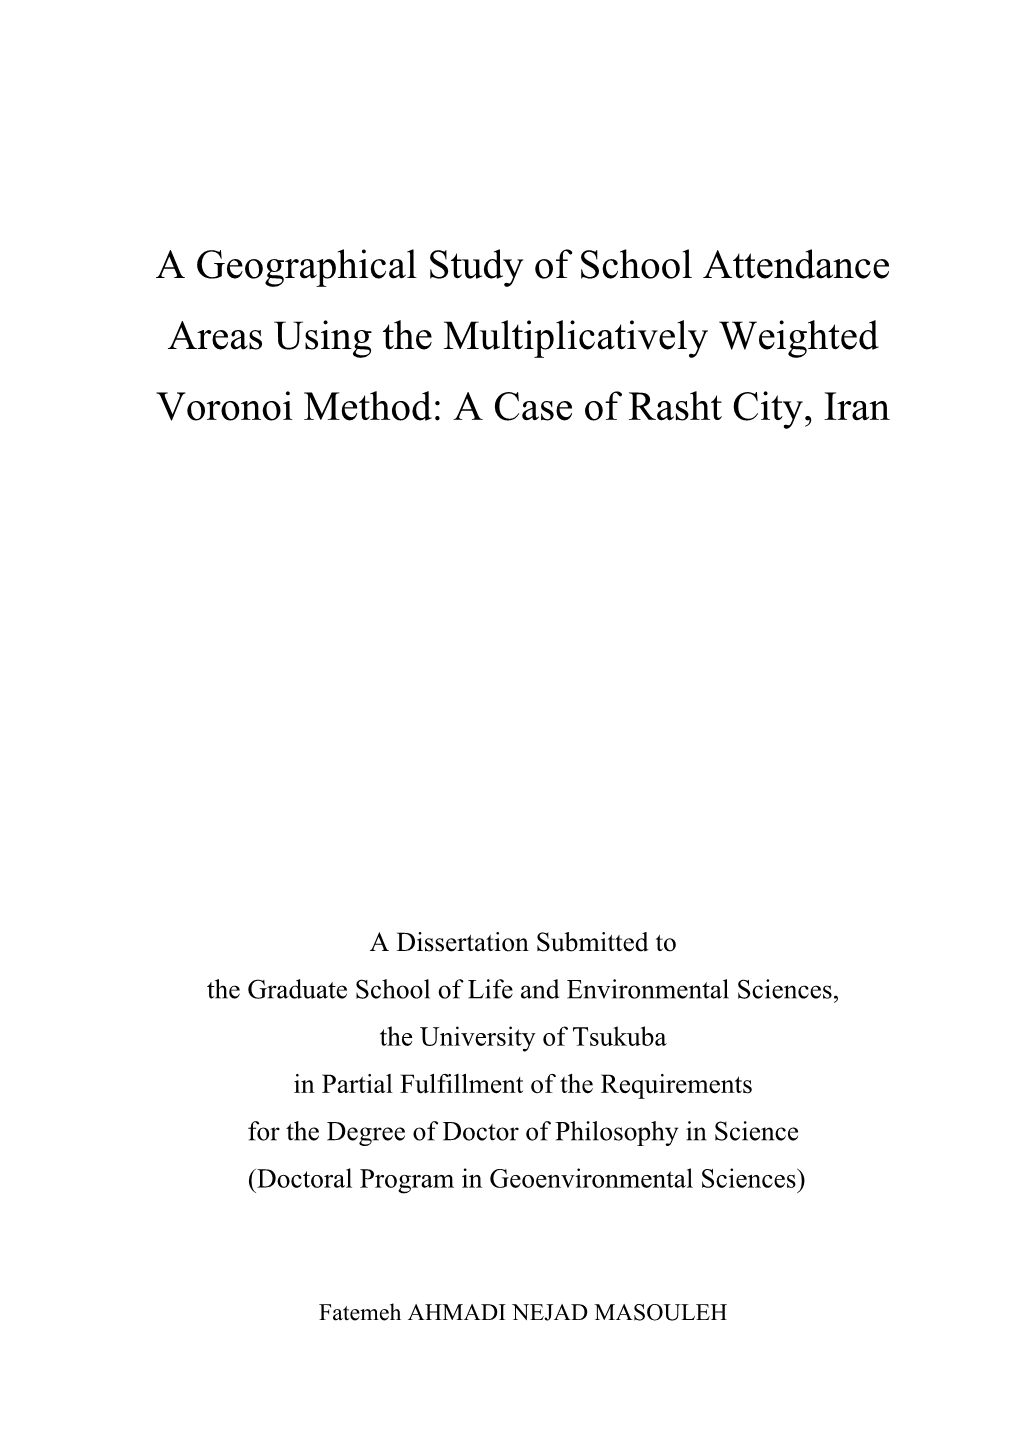 A Geographical Study of School Attendance Areas Using the Multiplicatively Weighted Voronoi Method: a Case of Rasht City, Iran